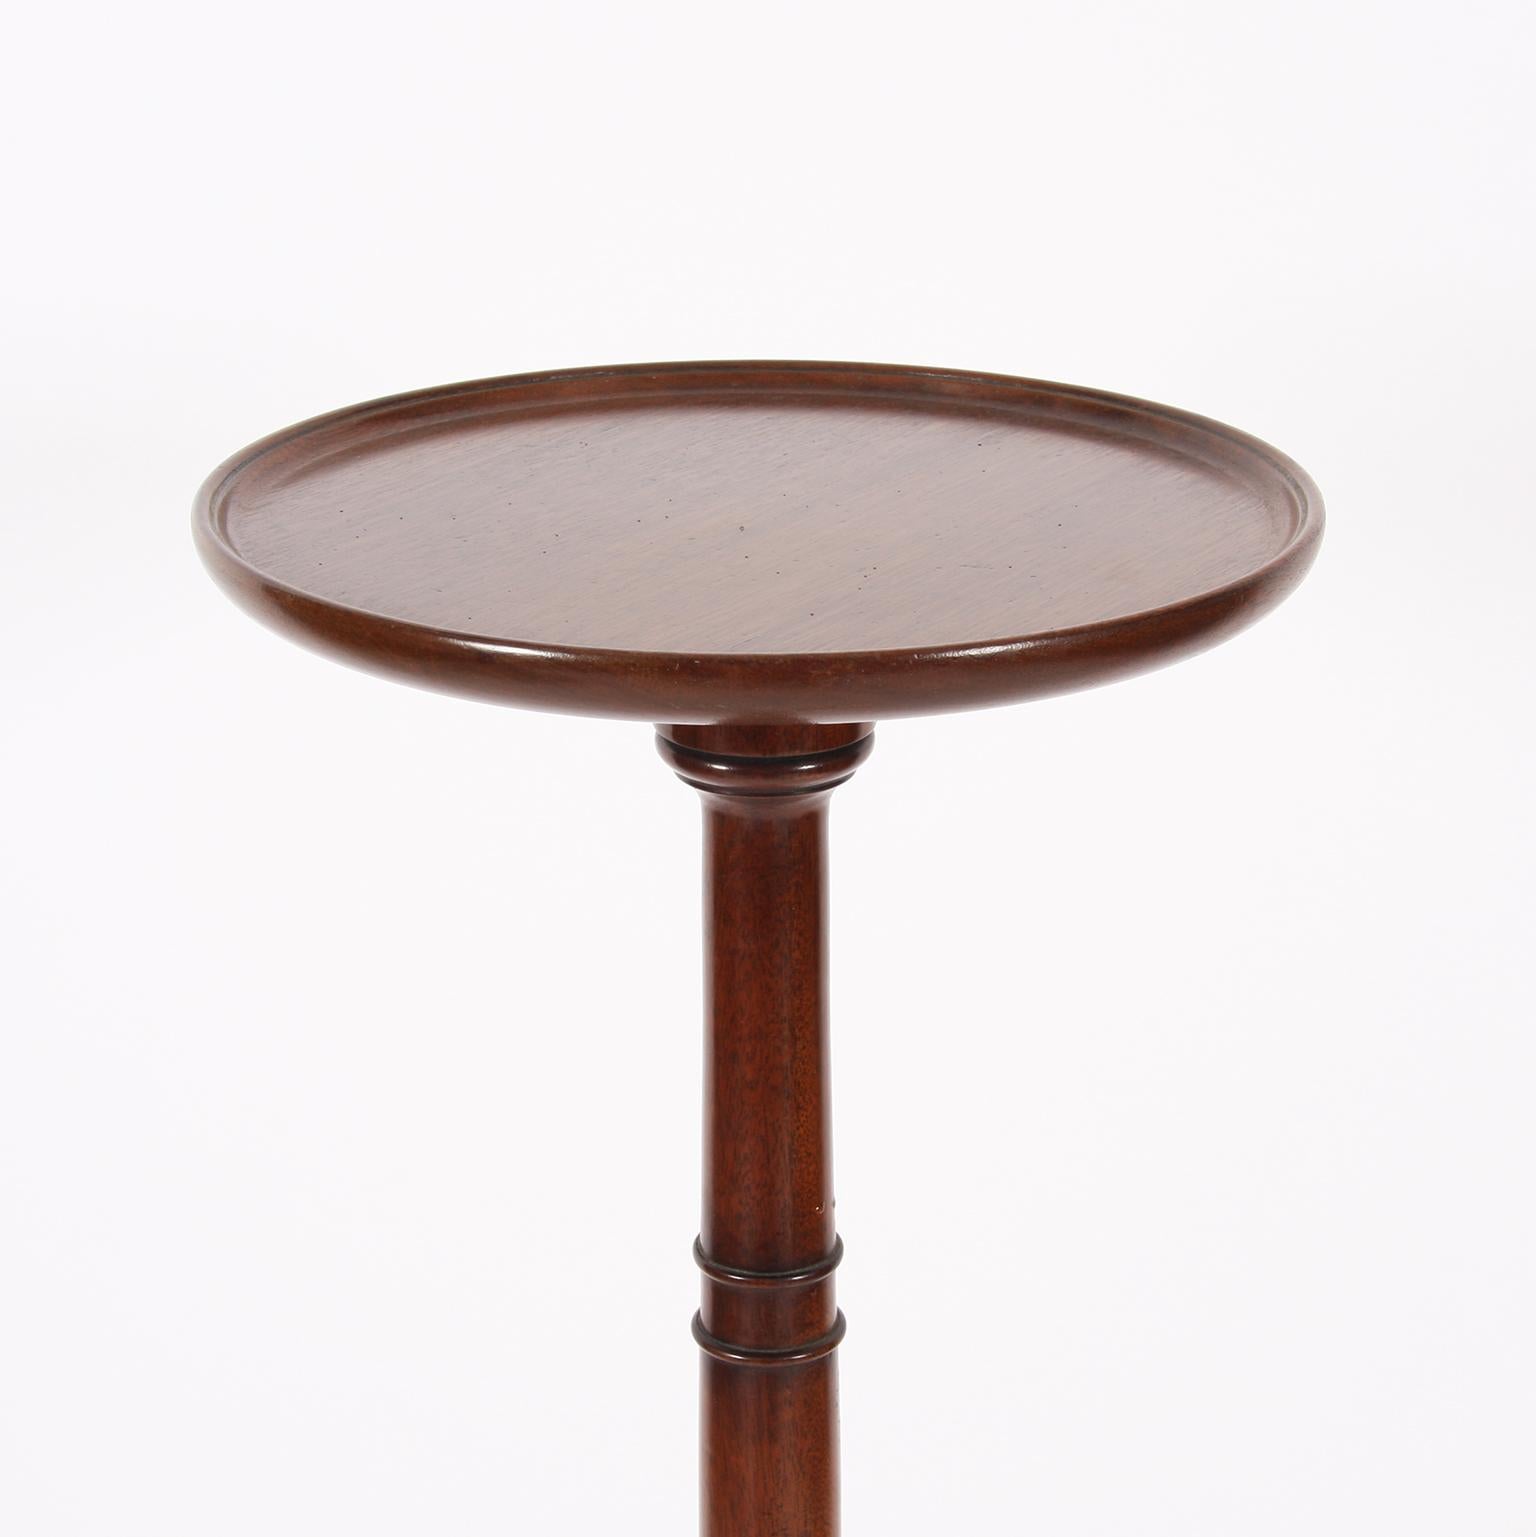 English, early 20th century

A tall, mahogany, lamp table, with elegant brass feet and castors. 

The width/depth measurement refer to the three legs.